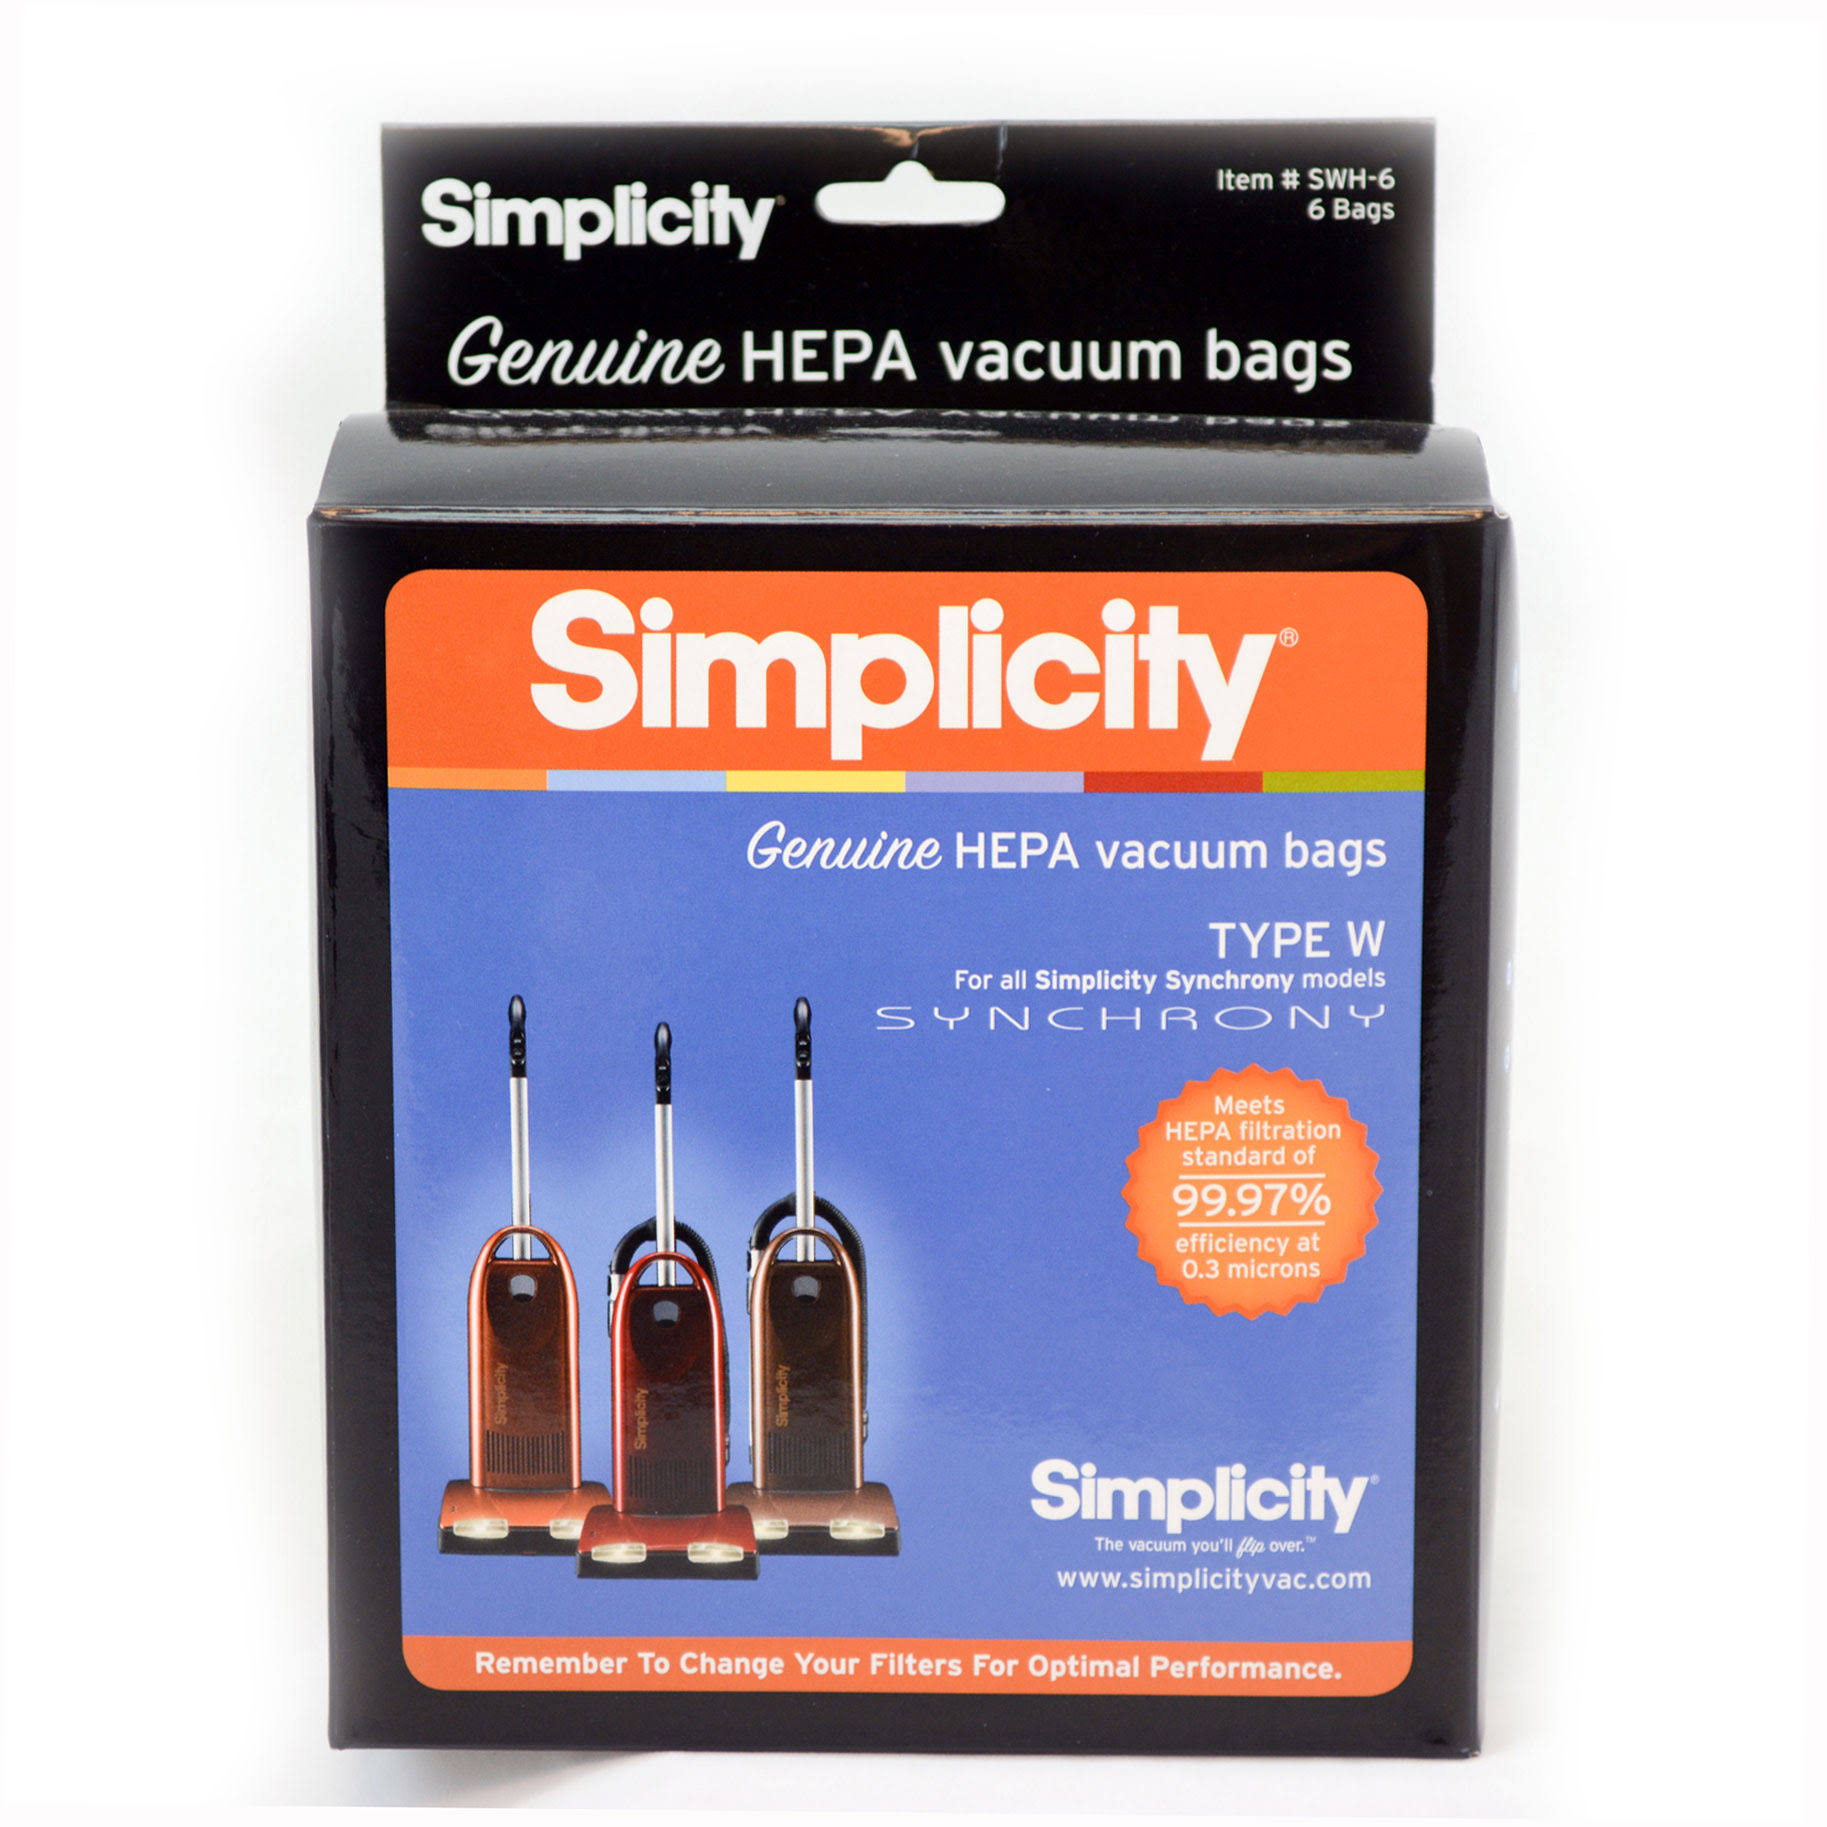 Simplicity Synchrony Hepa Vacuum Cleaner Bag - Type W, 6 Count